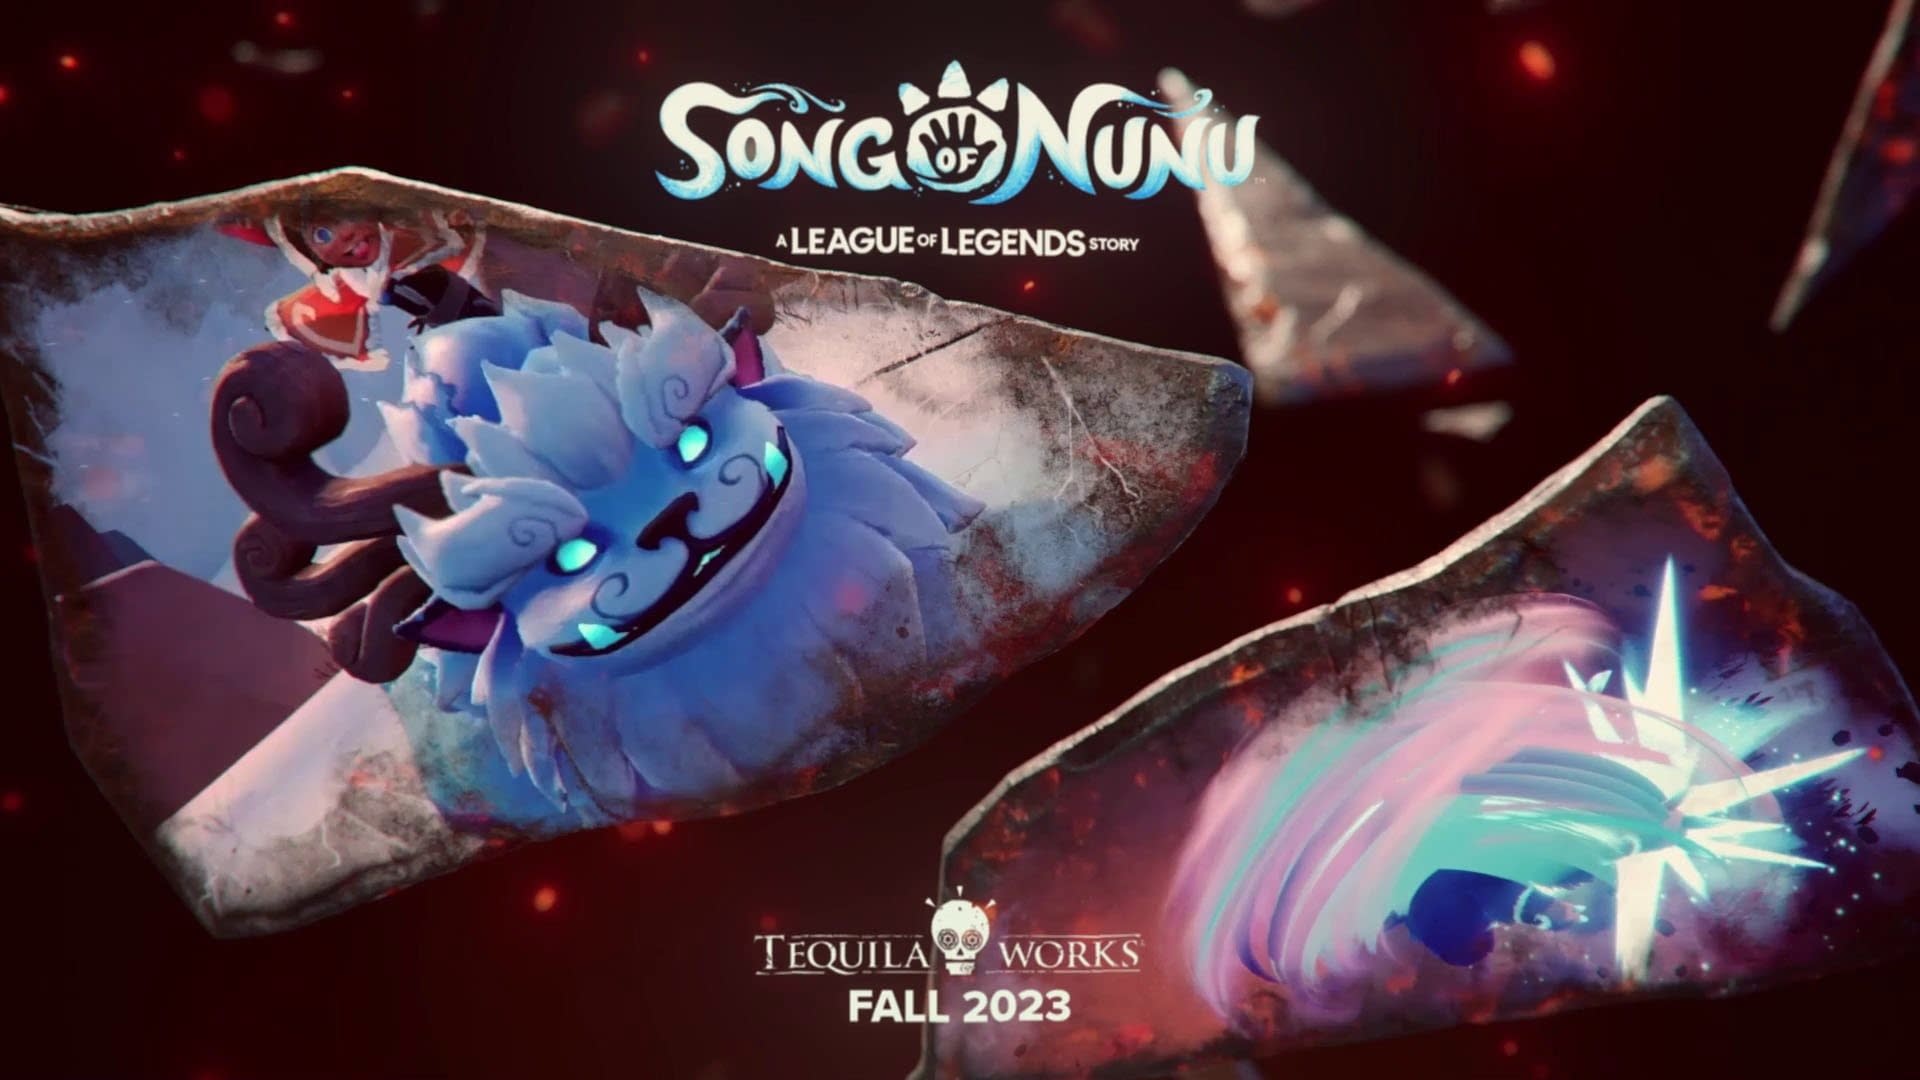 New Lol Game Song of Nunu Comes In This Spring